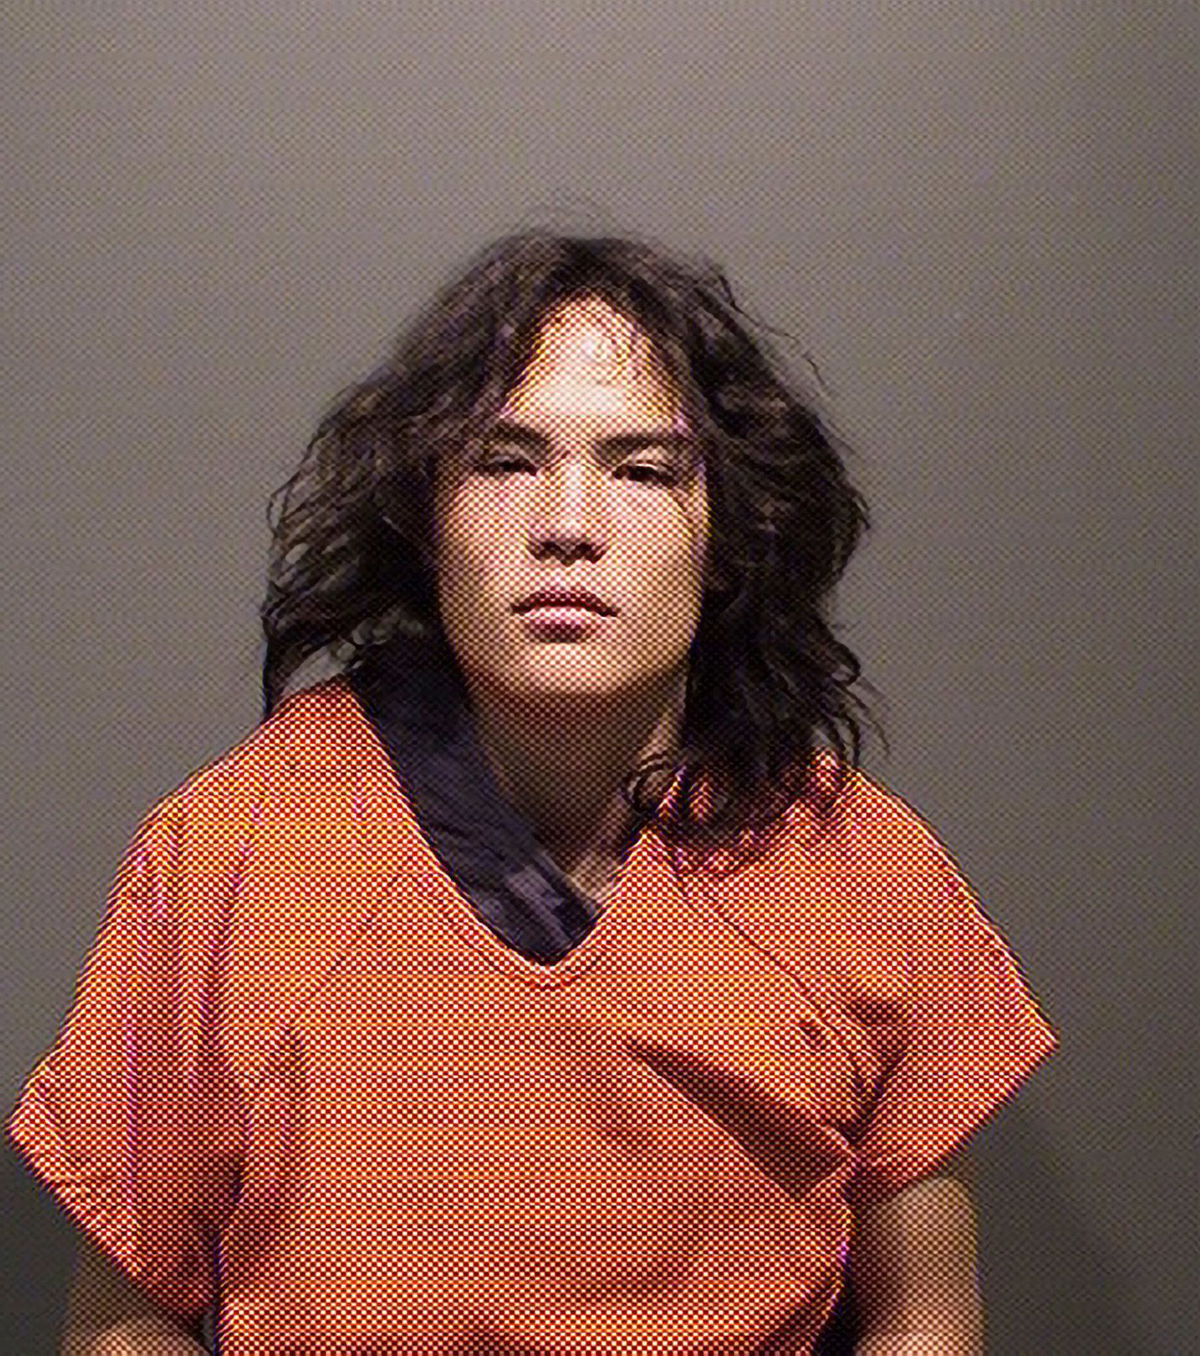 <i>Jefferson County Sheriff's Office via CNN Newsource</i><br/>This photo provided by the Jefferson County Sheriff's Office shows Zachary Kwak.